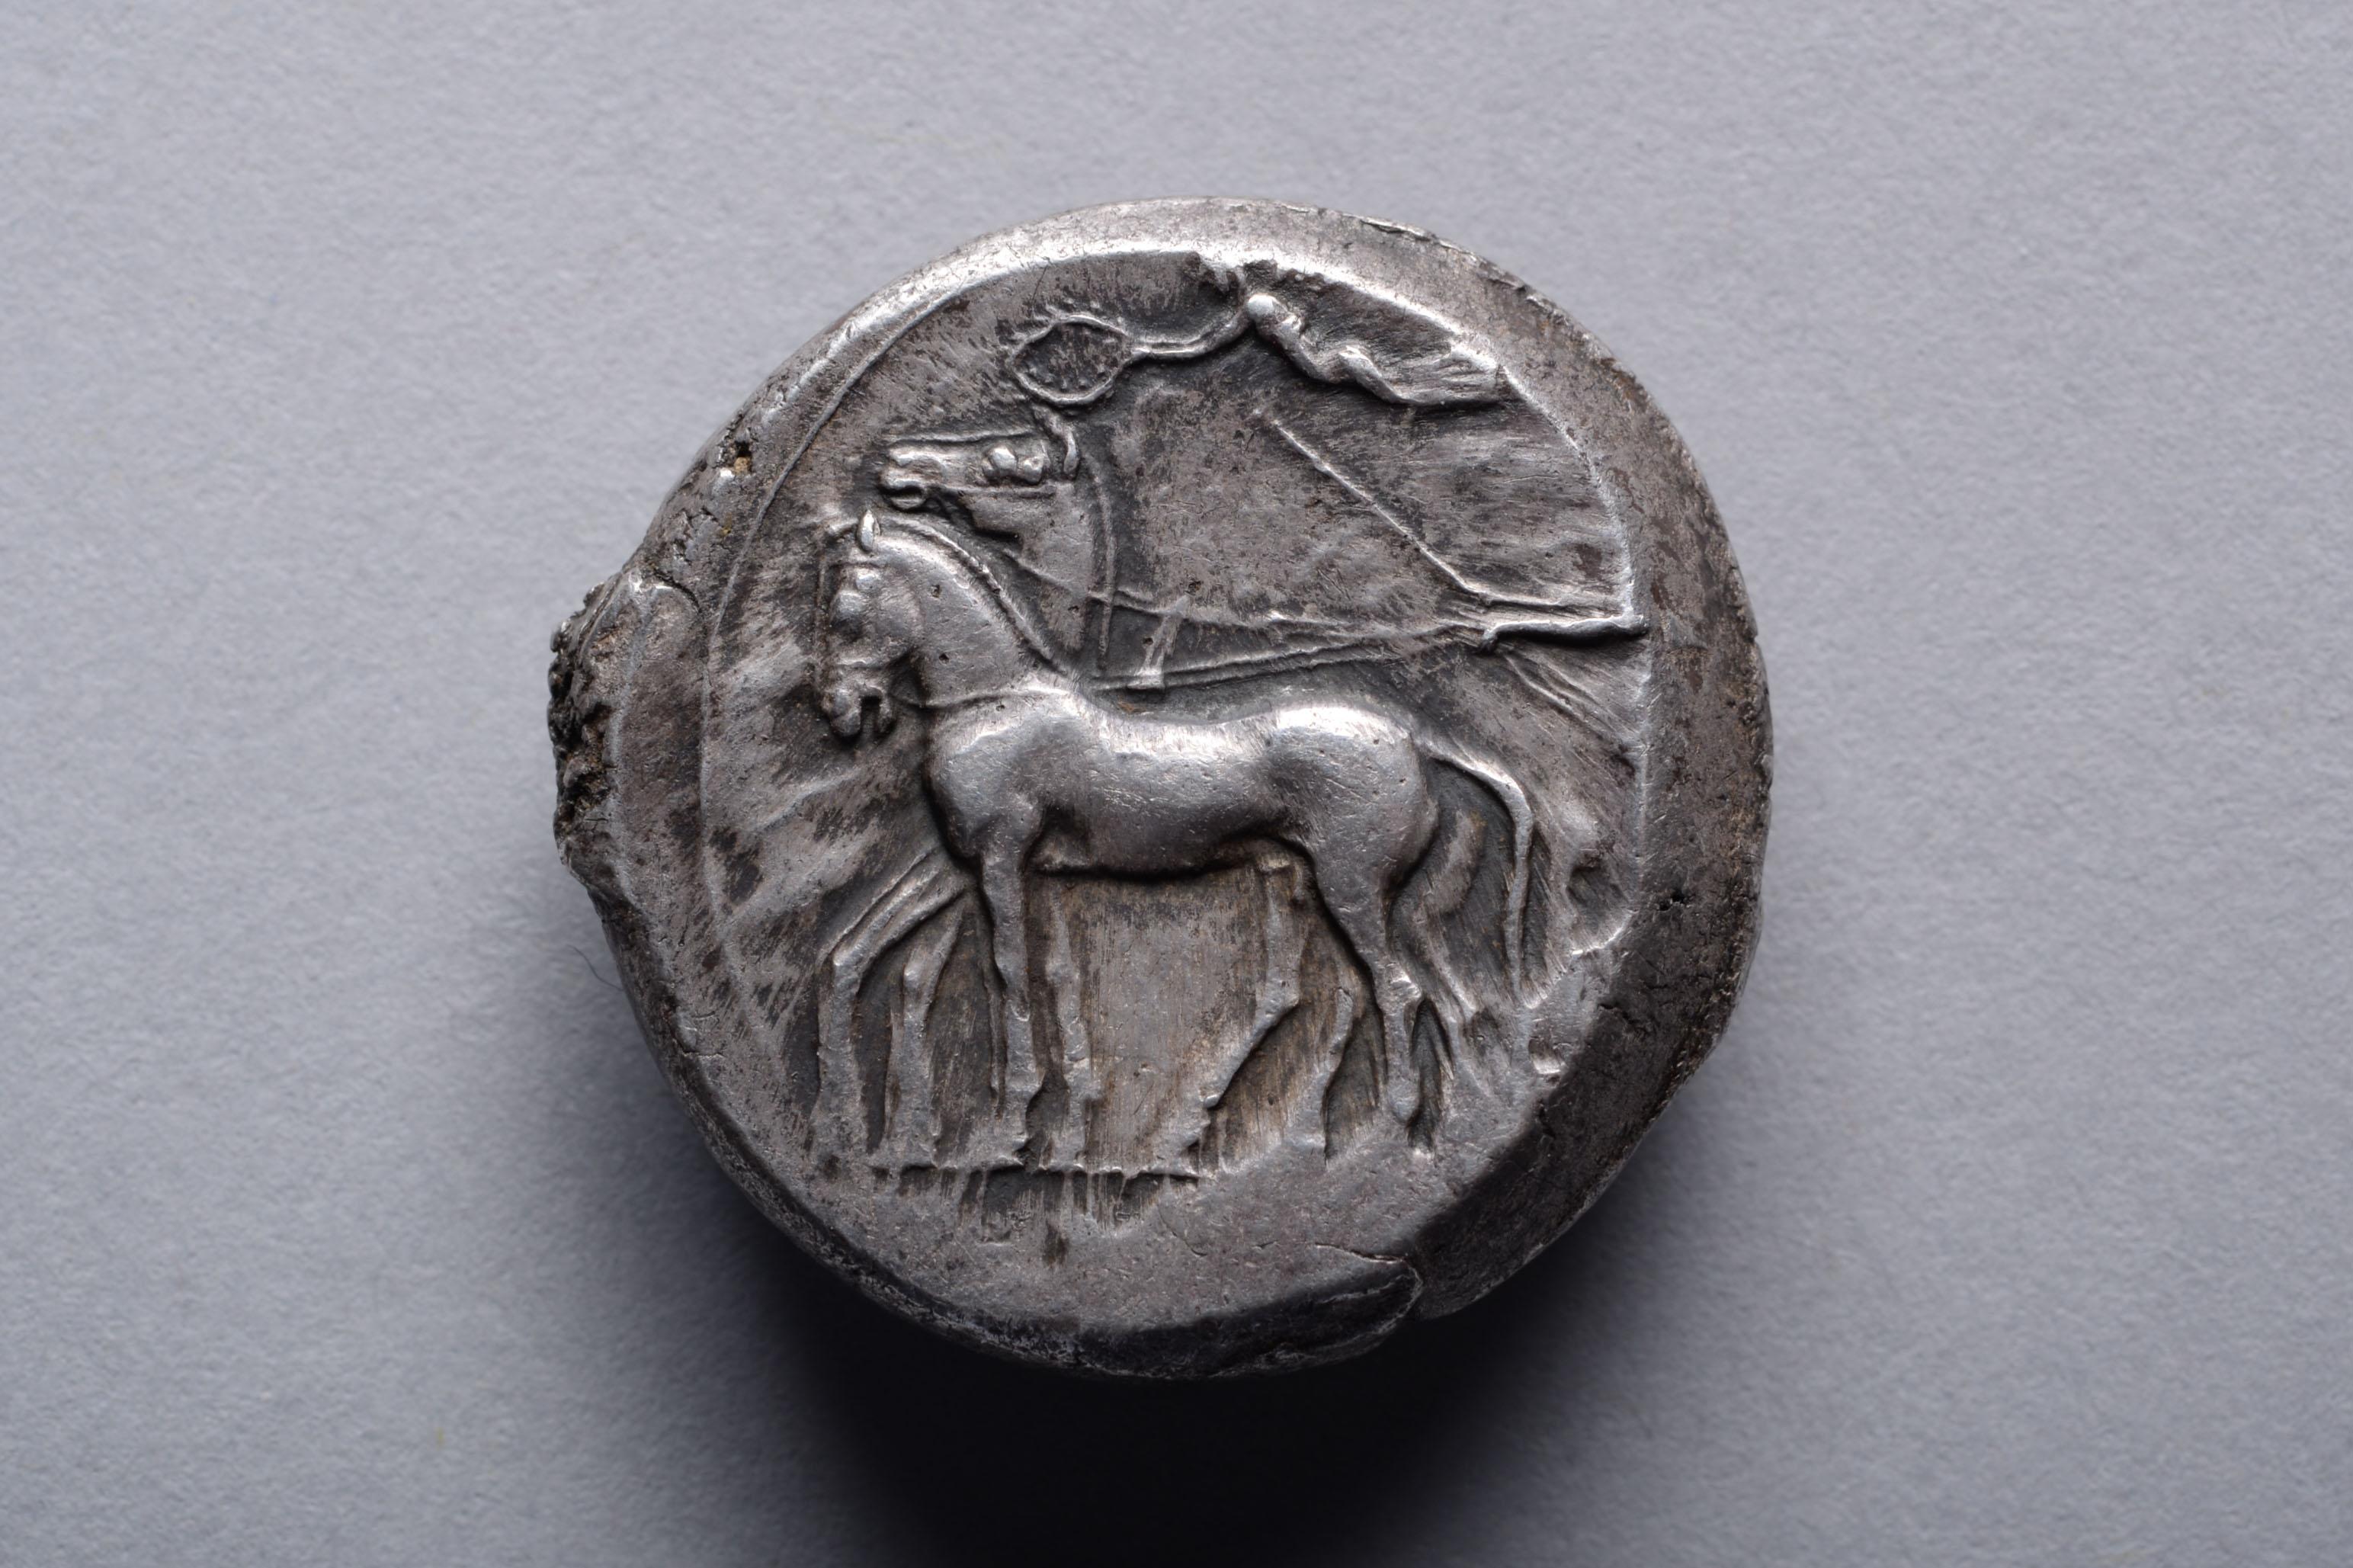 The obverse depicting a charioteer driving a four horse chariot, with the goddess of victory, Nike, descending from the heavens to crown the horses with a laurel wreath. The reverse with the image of the eponymous river god, Gelas, depicted in his